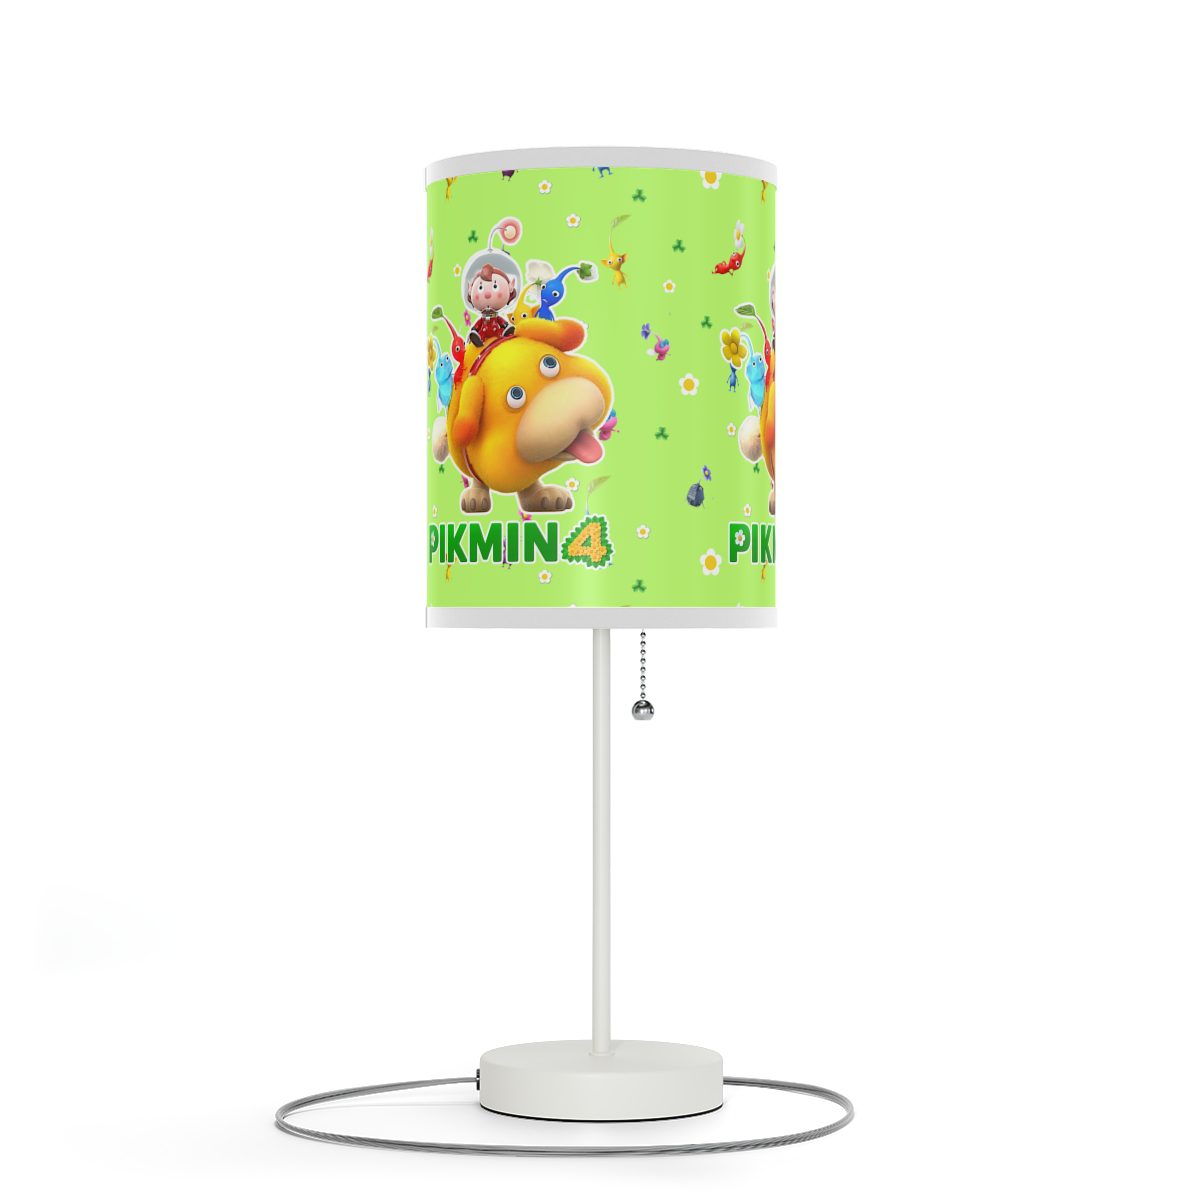 Pikmin 4 videogame Green Lamp on a Stand Cool Kiddo 14